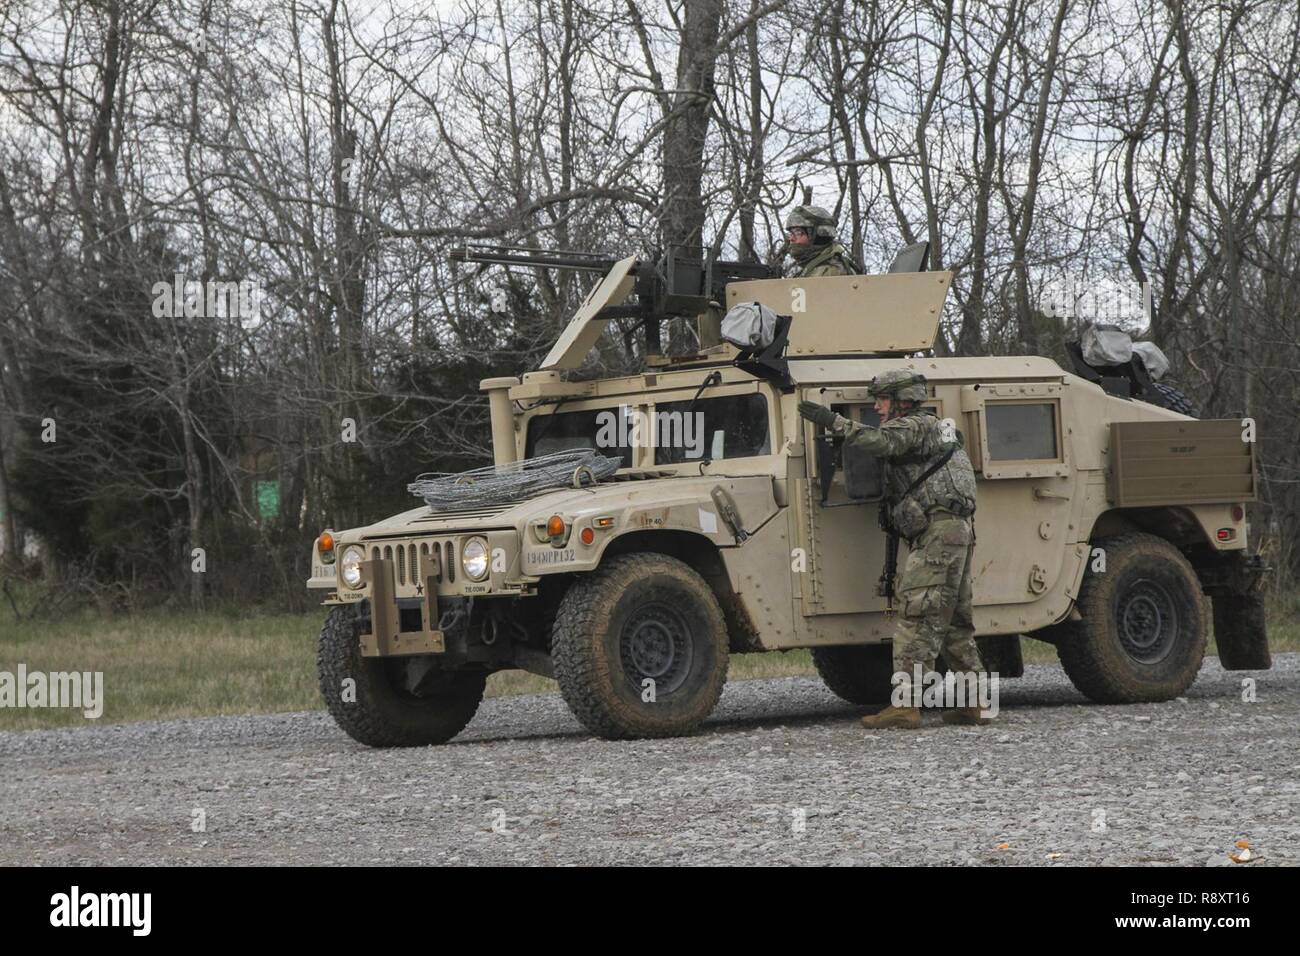 A squad leader with 1st Platoon, 194th Military Police Company, 716th MP Battalion, 101st Airborne Division (Air Assault) Sustainment Brigade, 101st Abn. Div., directs a Soldier, March 14, 2017, as the platoon establishes a traffic control point during a platoon external evaluation on Fort Campbell, Kentucky. Stock Photo